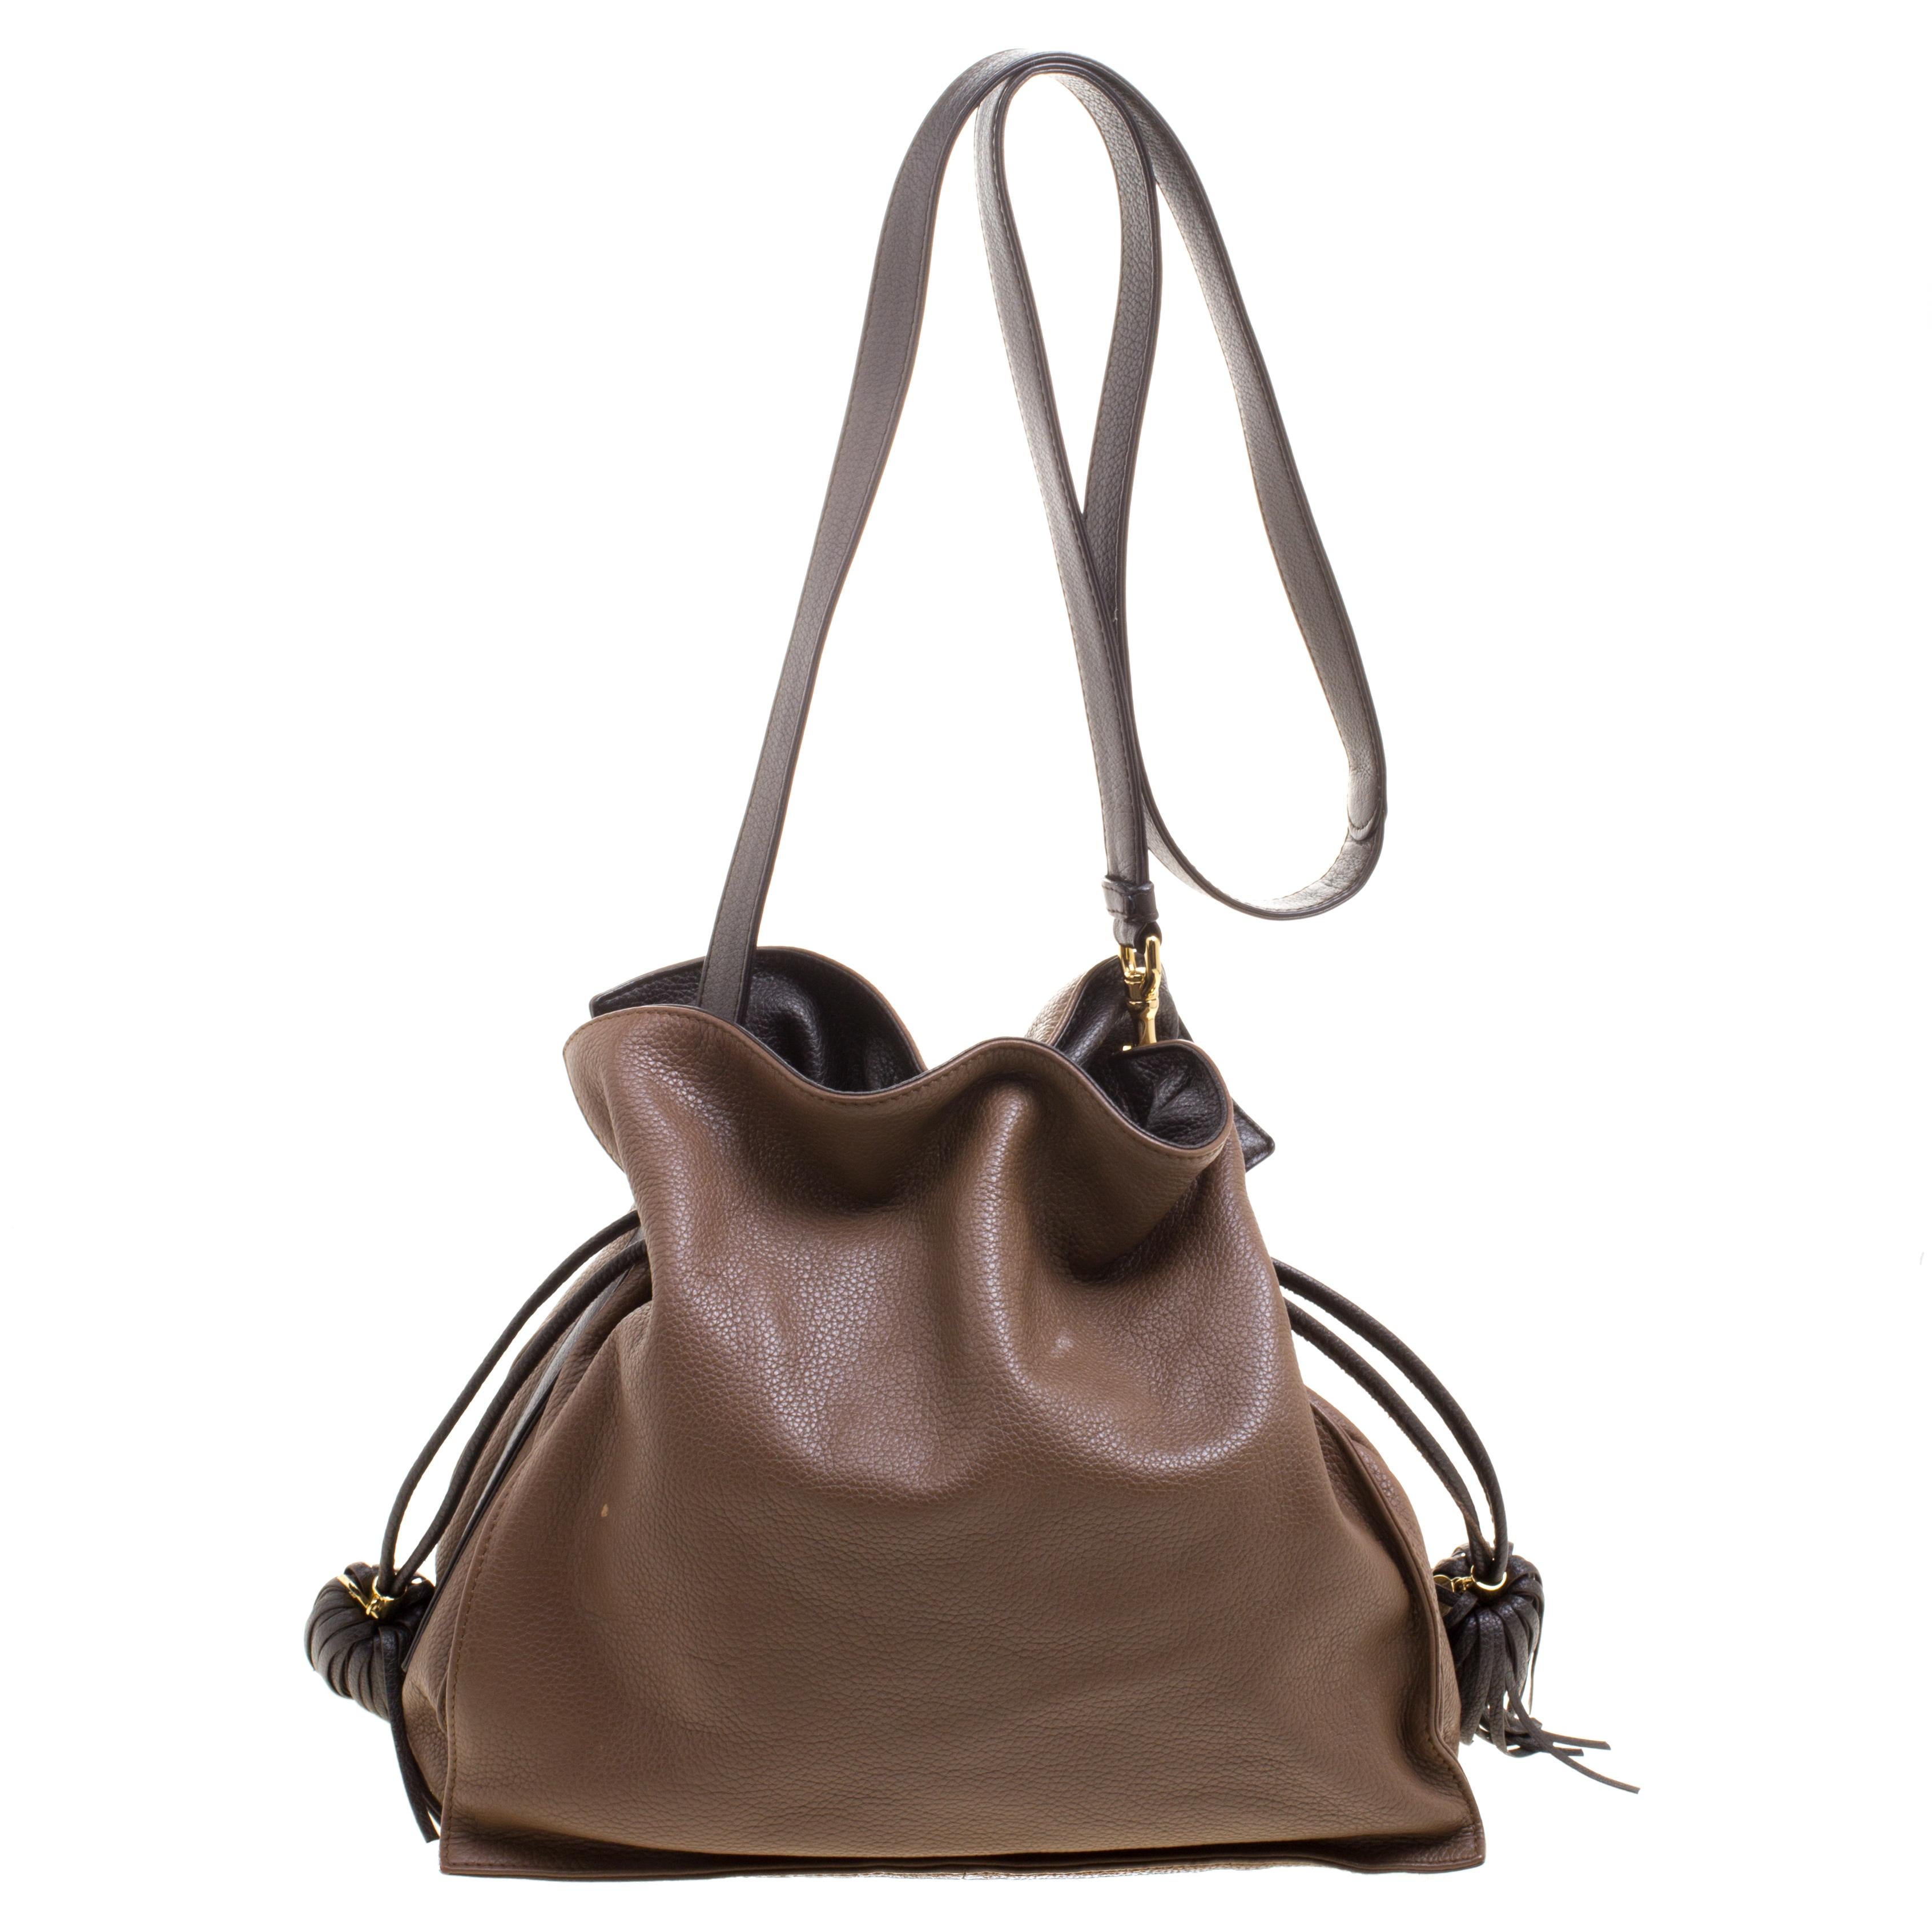 Loewe's shoulder bag is crafted from brown leather and comes with a removable shoulder strap. The drawstring closure with tassel detail opens to a fabric lined interior that has a slip pocket and a zip pocket. This creation is definitely